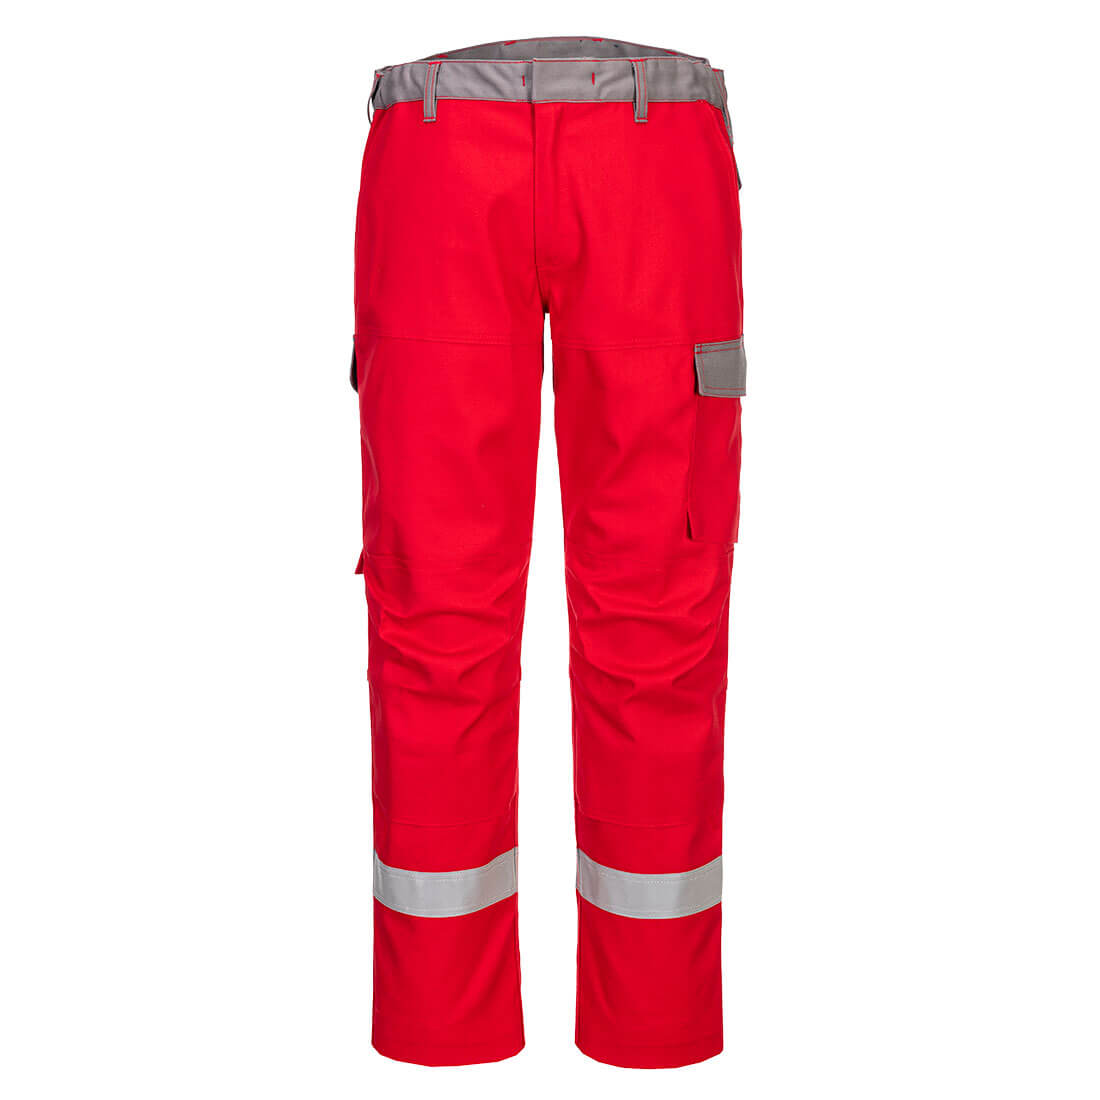 Bizflame Industry Two Tone Trousers  (FR06)